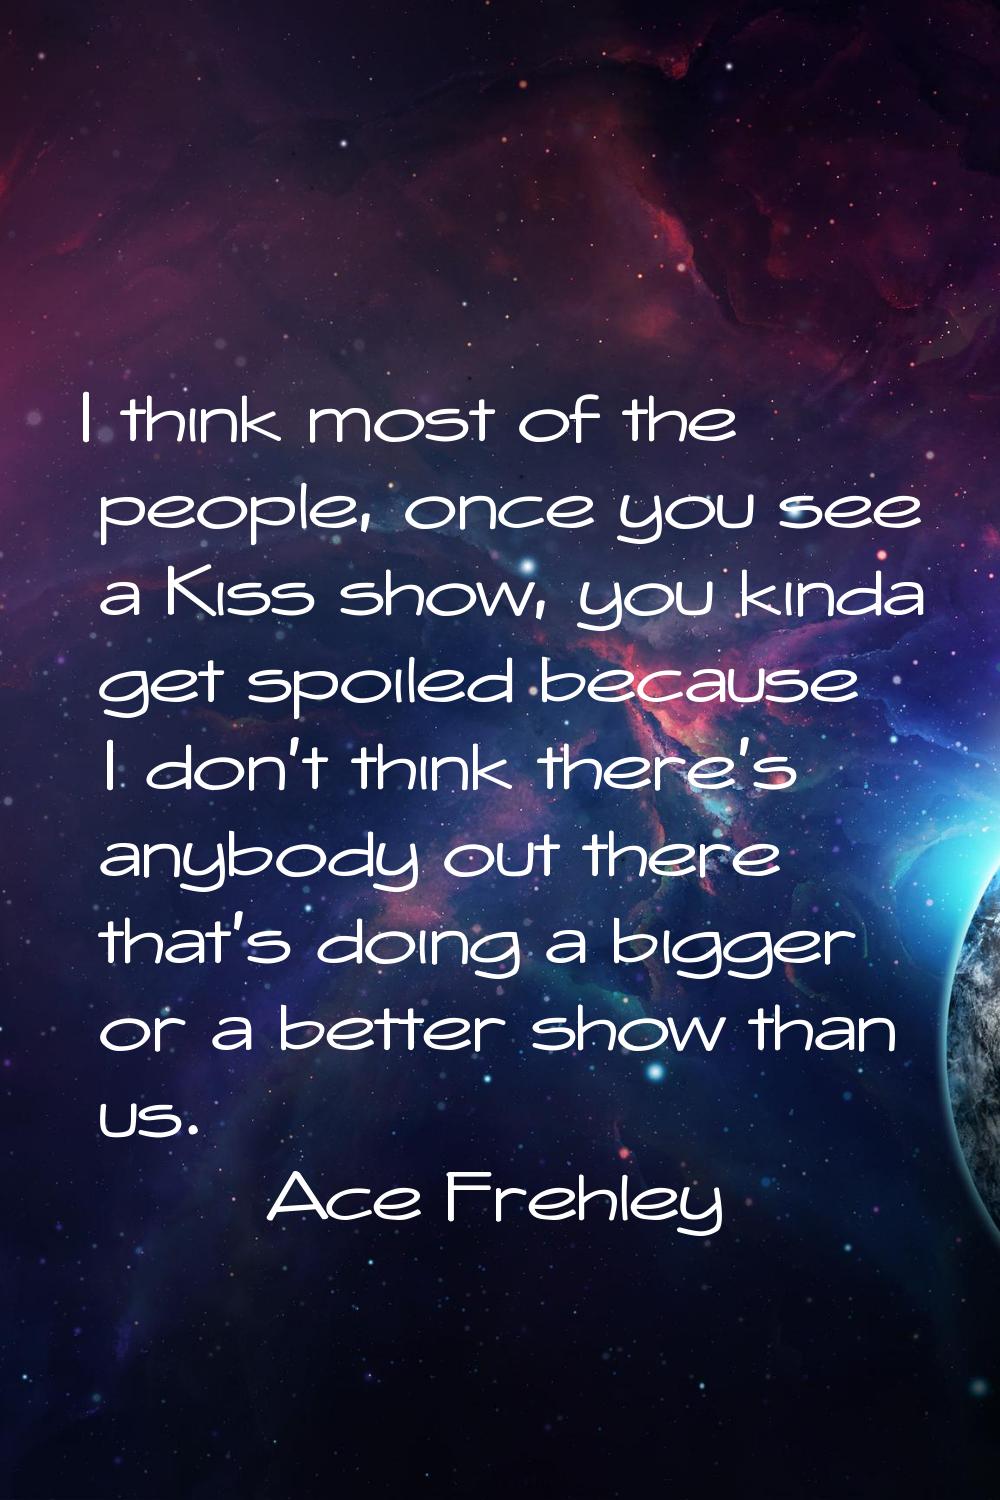 I think most of the people, once you see a Kiss show, you kinda get spoiled because I don't think t